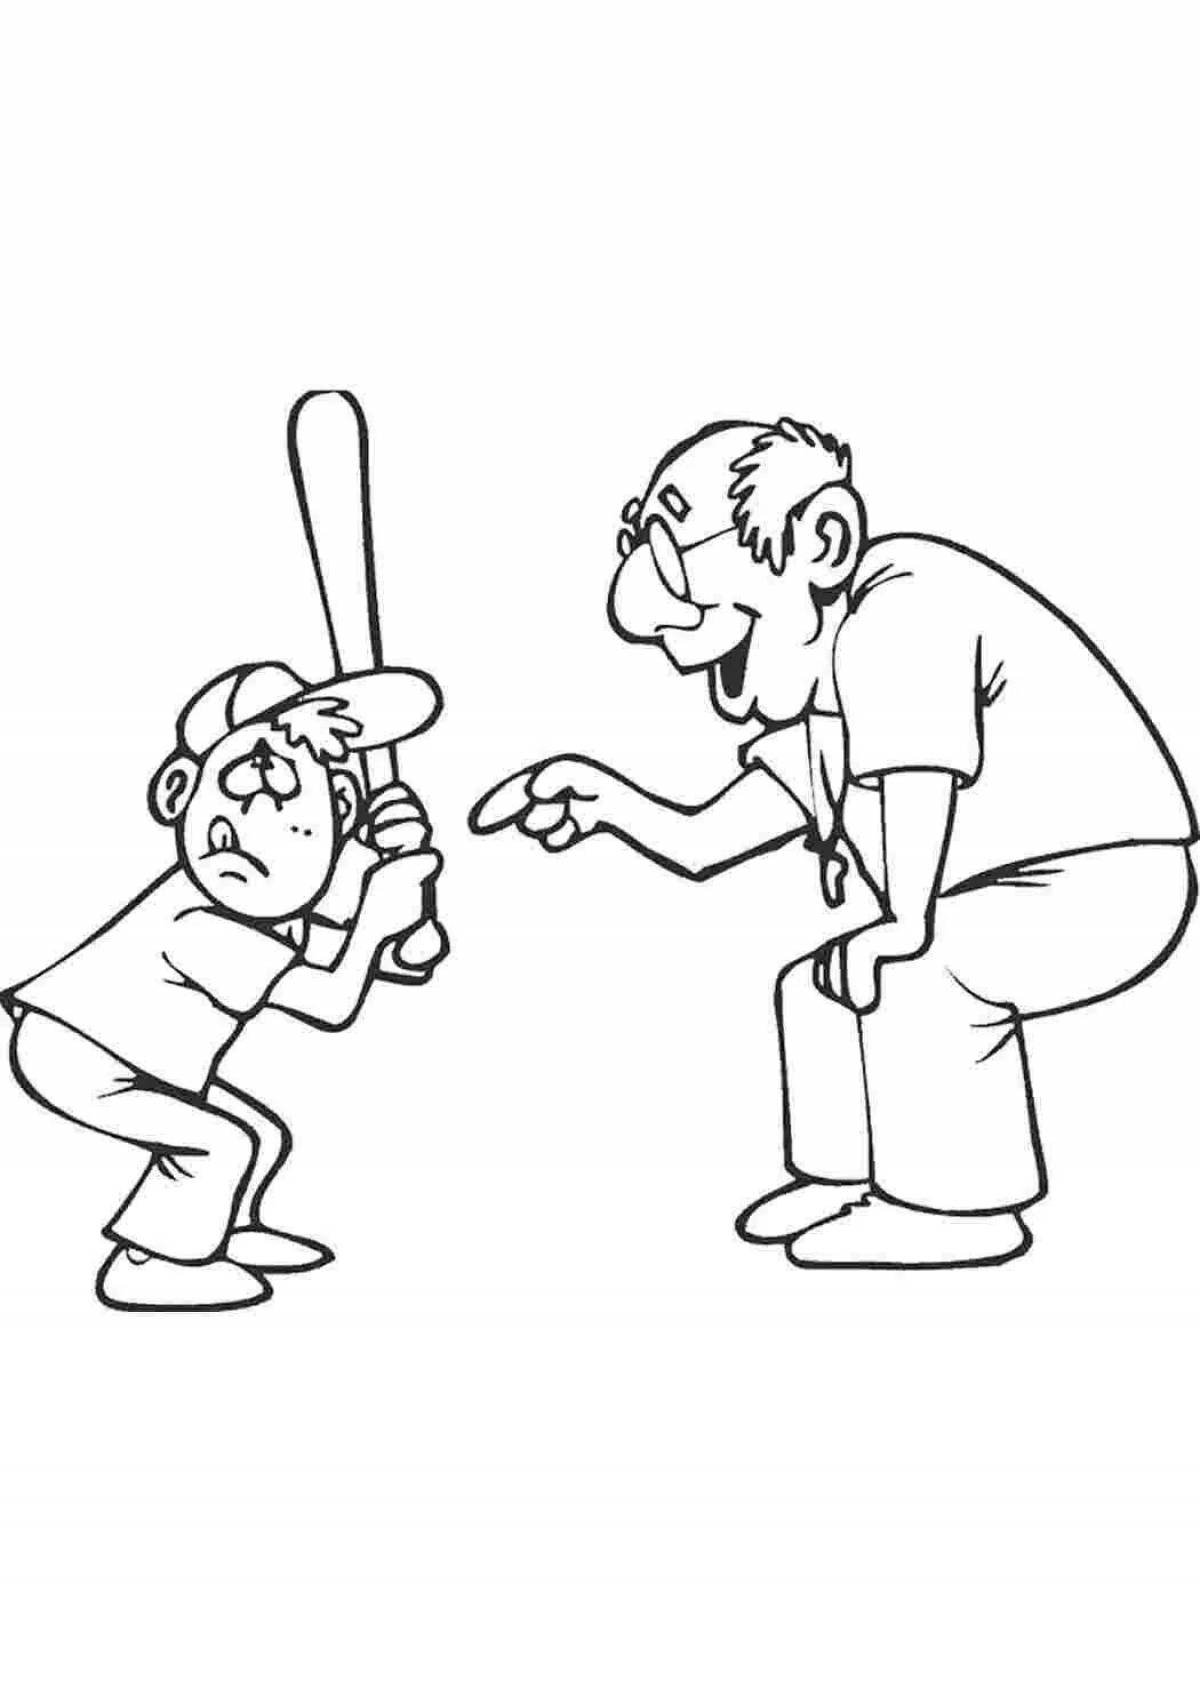 Coloring page joyful grandfather and granddaughter